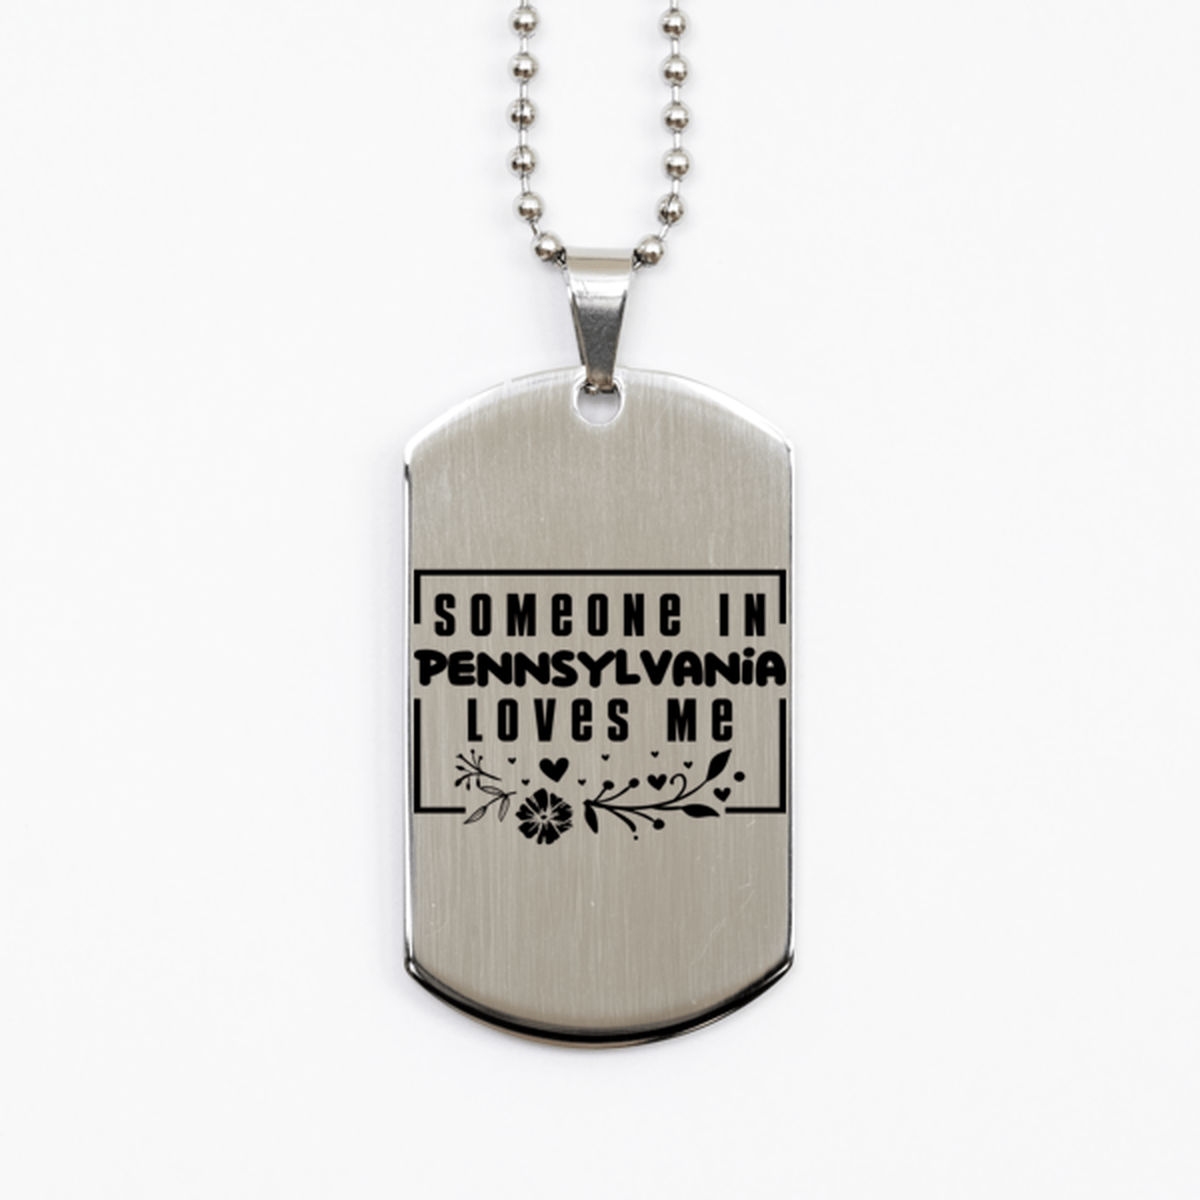 Cute Pennsylvania Silver Dog Tag Necklace, Someone in Pennsylvania Loves Me, Best Birthday Gifts from Pennsylvania Friends & Family